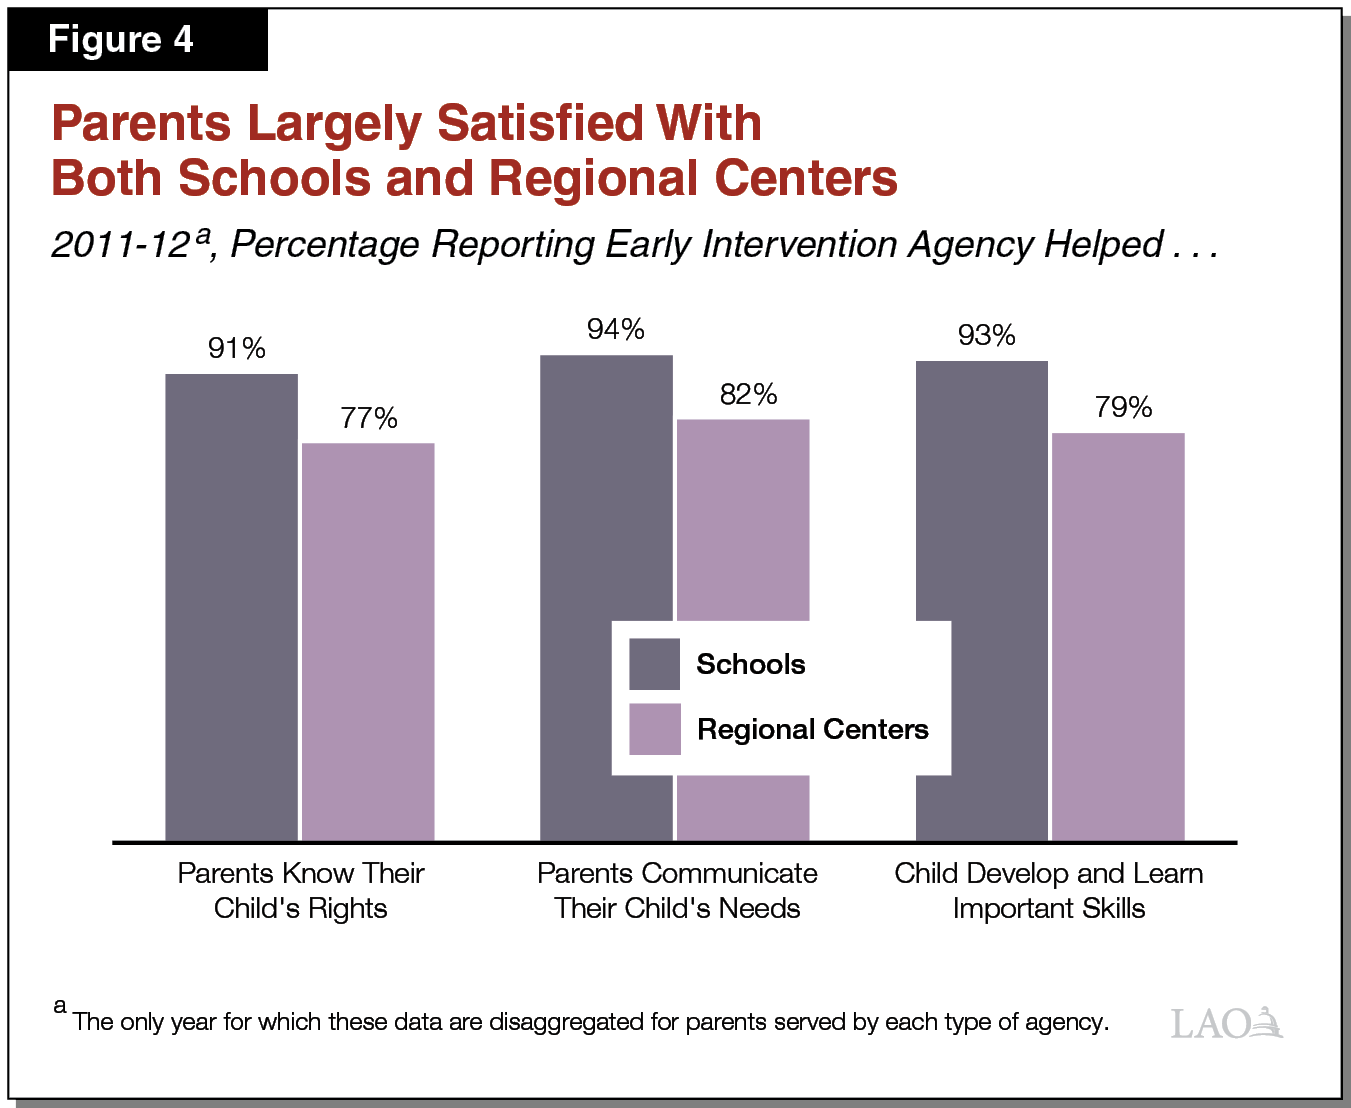 Figure 4 - Parents Largely Satisfied With Both Schools and Regional Centers